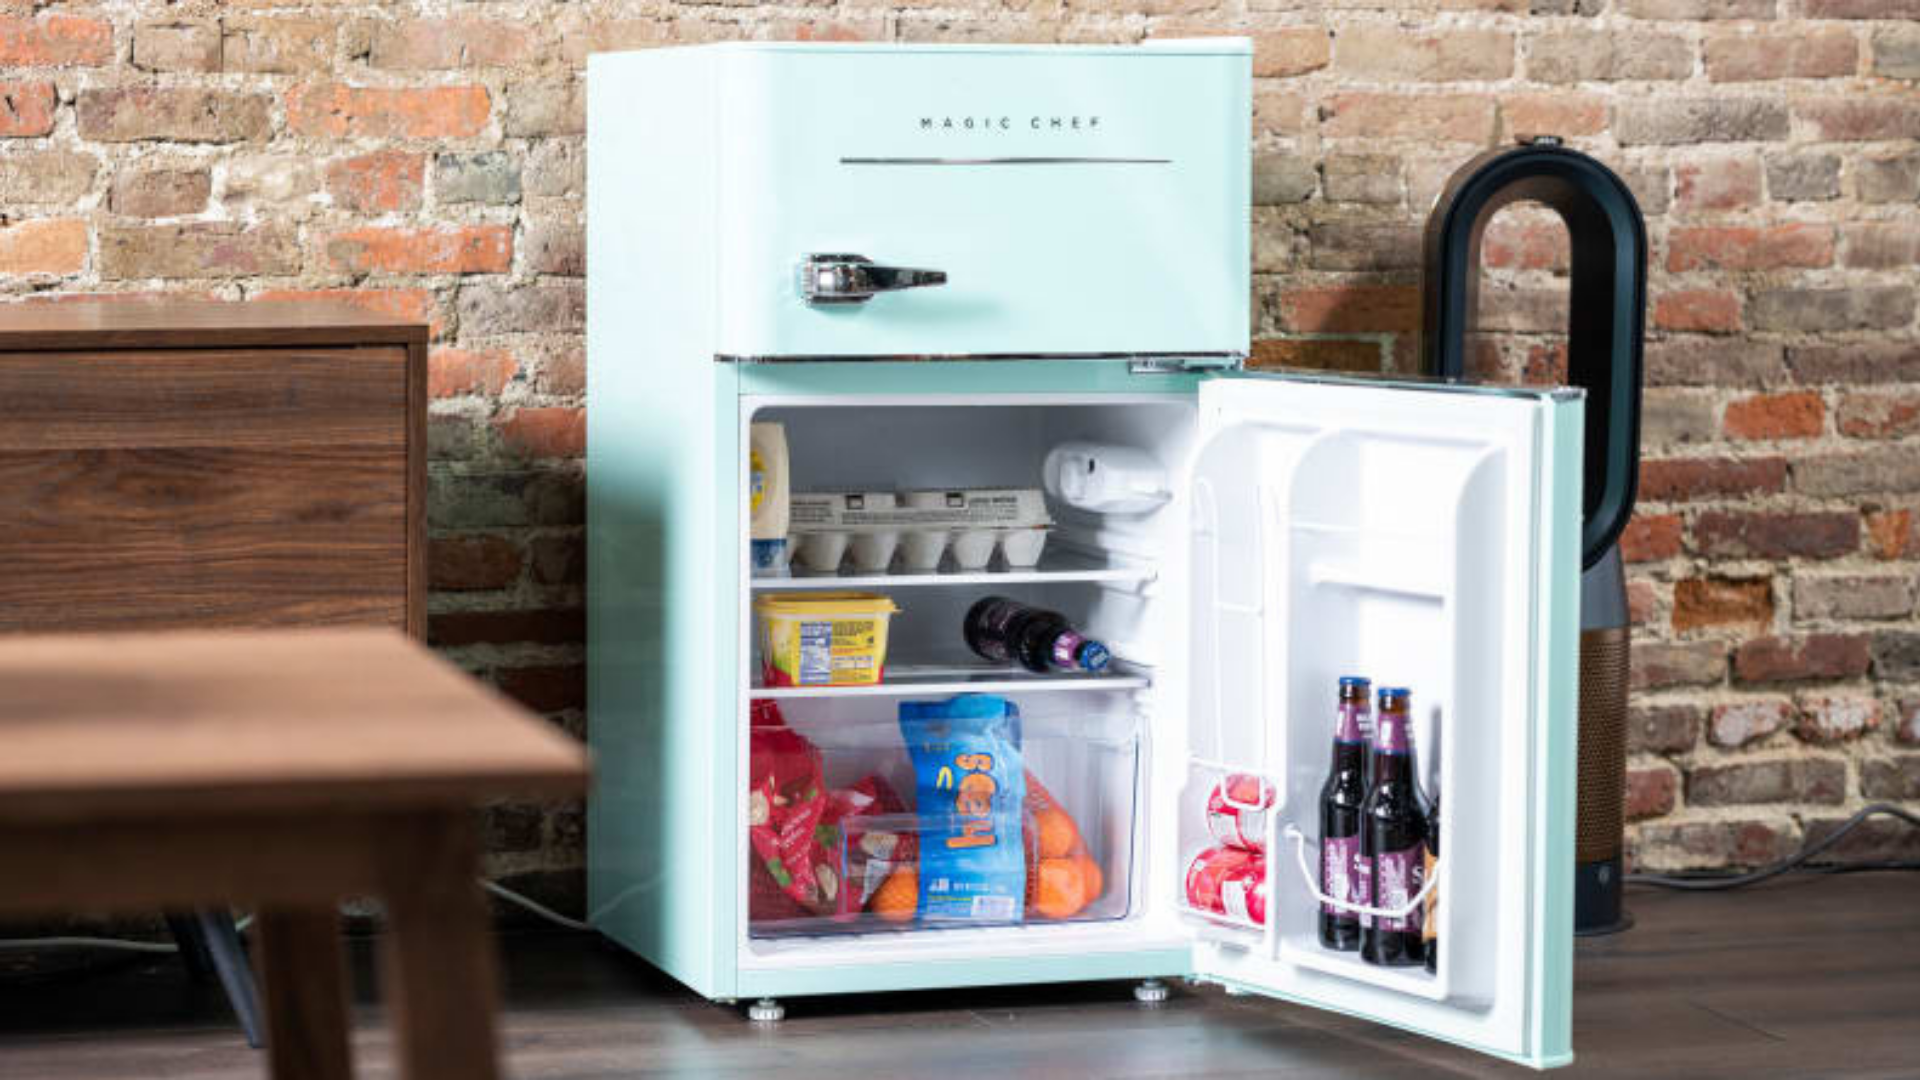 This fridge really shines thanks to its large freezer compartment, where you have enough room for a quart of ice cream and bags of frozen fruit.